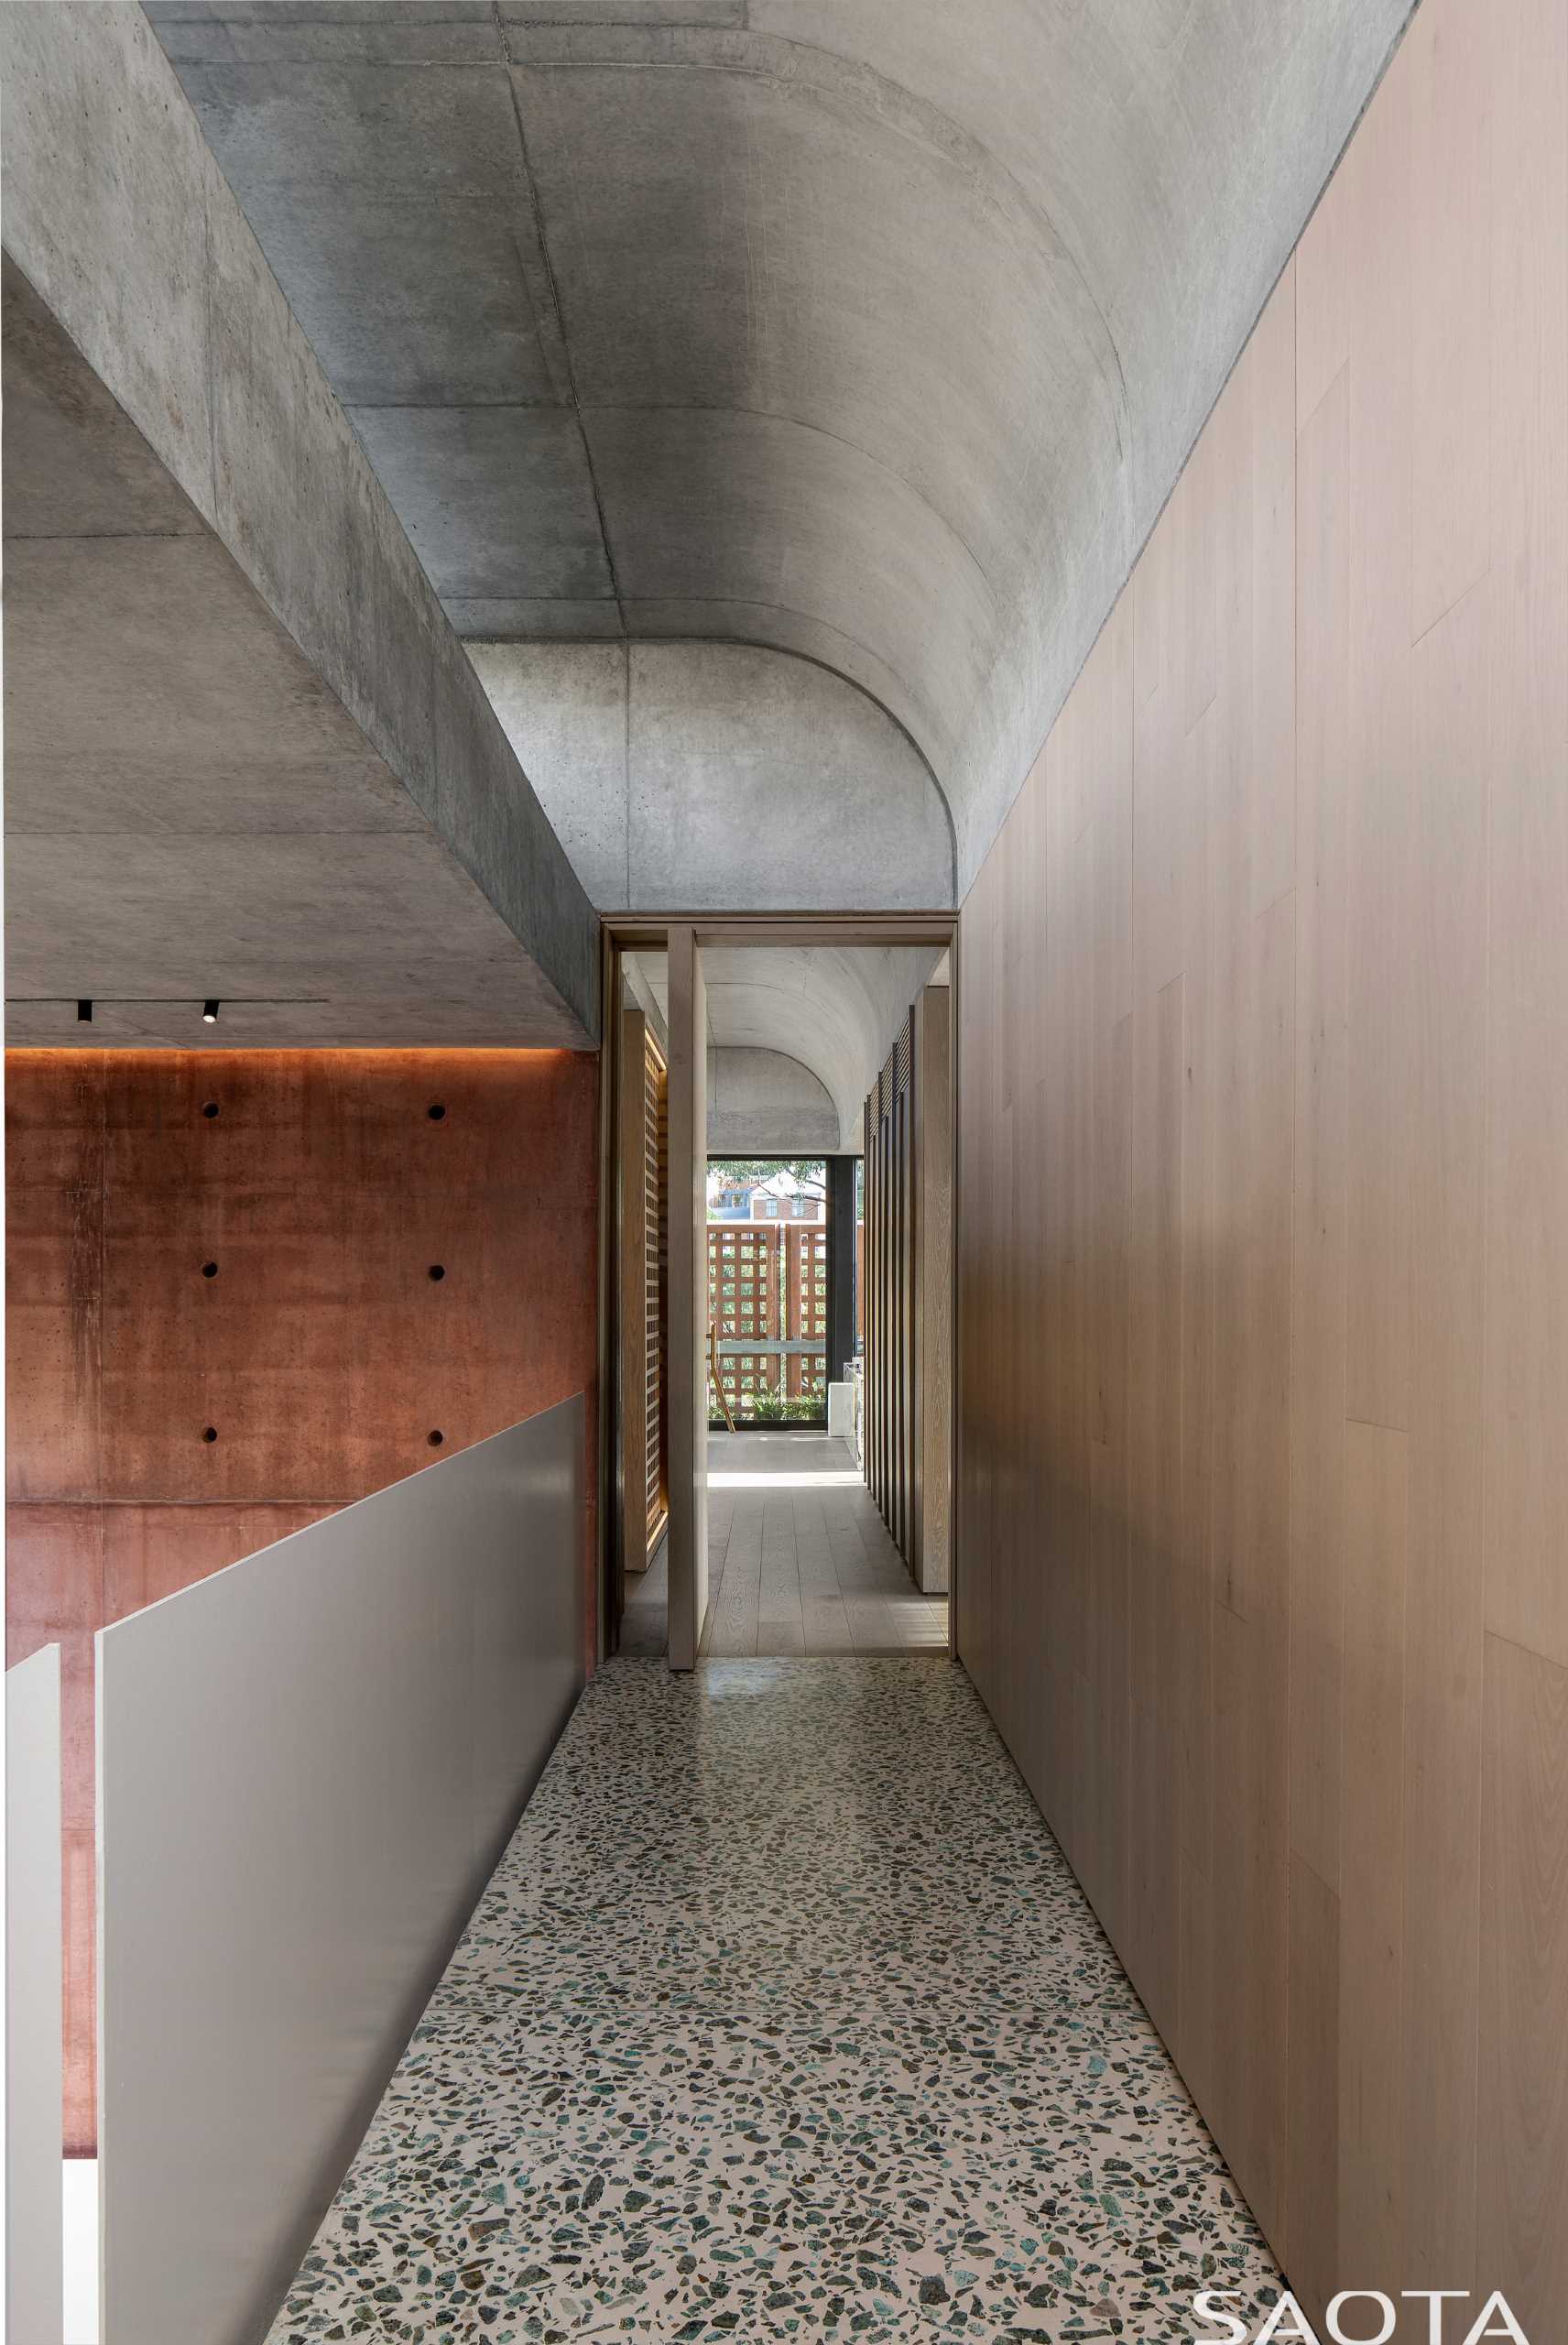 A hallway with a polished polymer concrete floor.